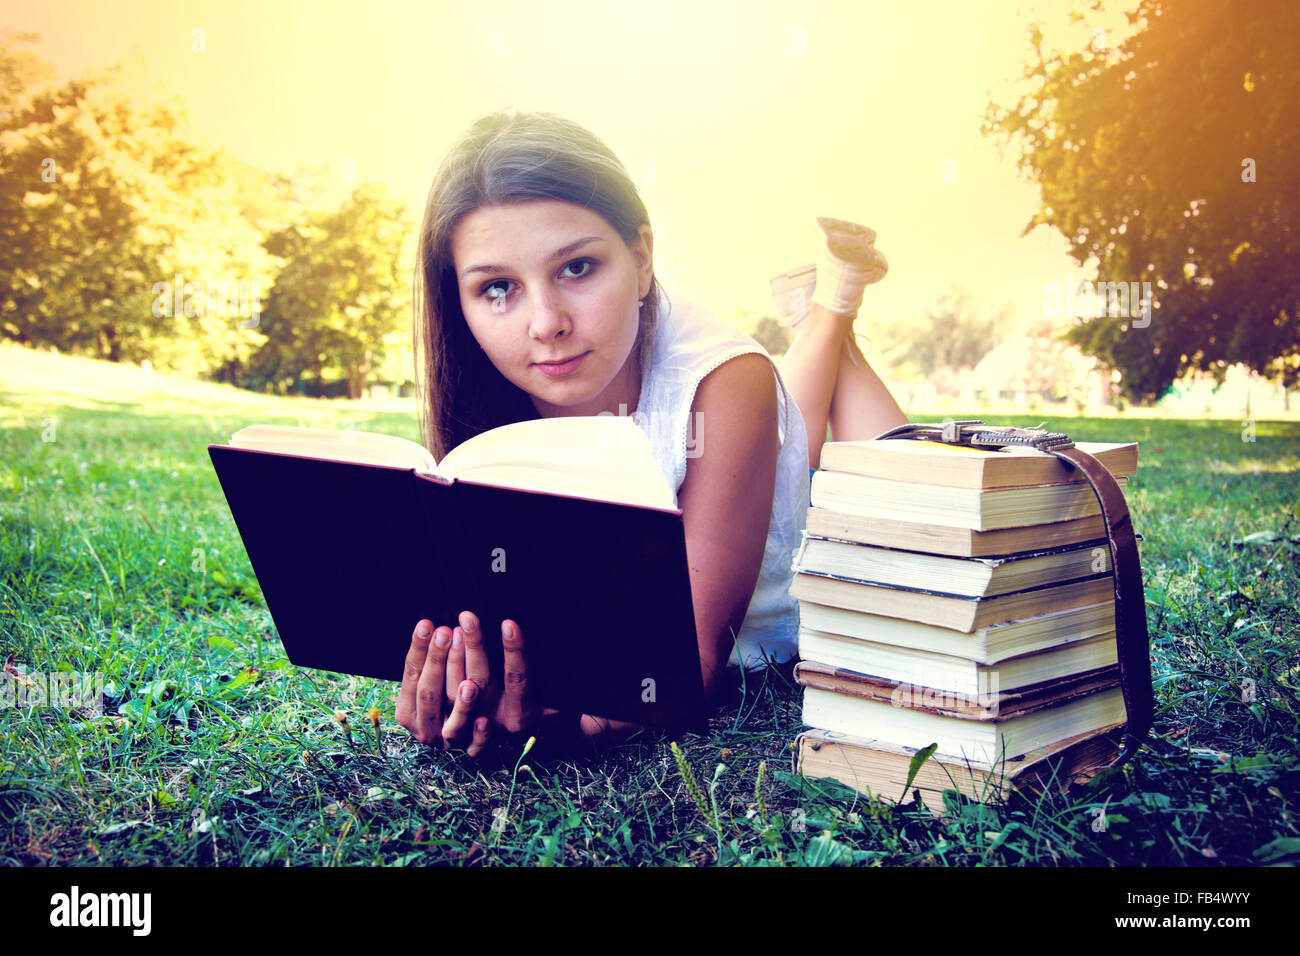 Student girl reading a book on campus grass. Education conceptual image. Instagram vintage picture. Stock Photo